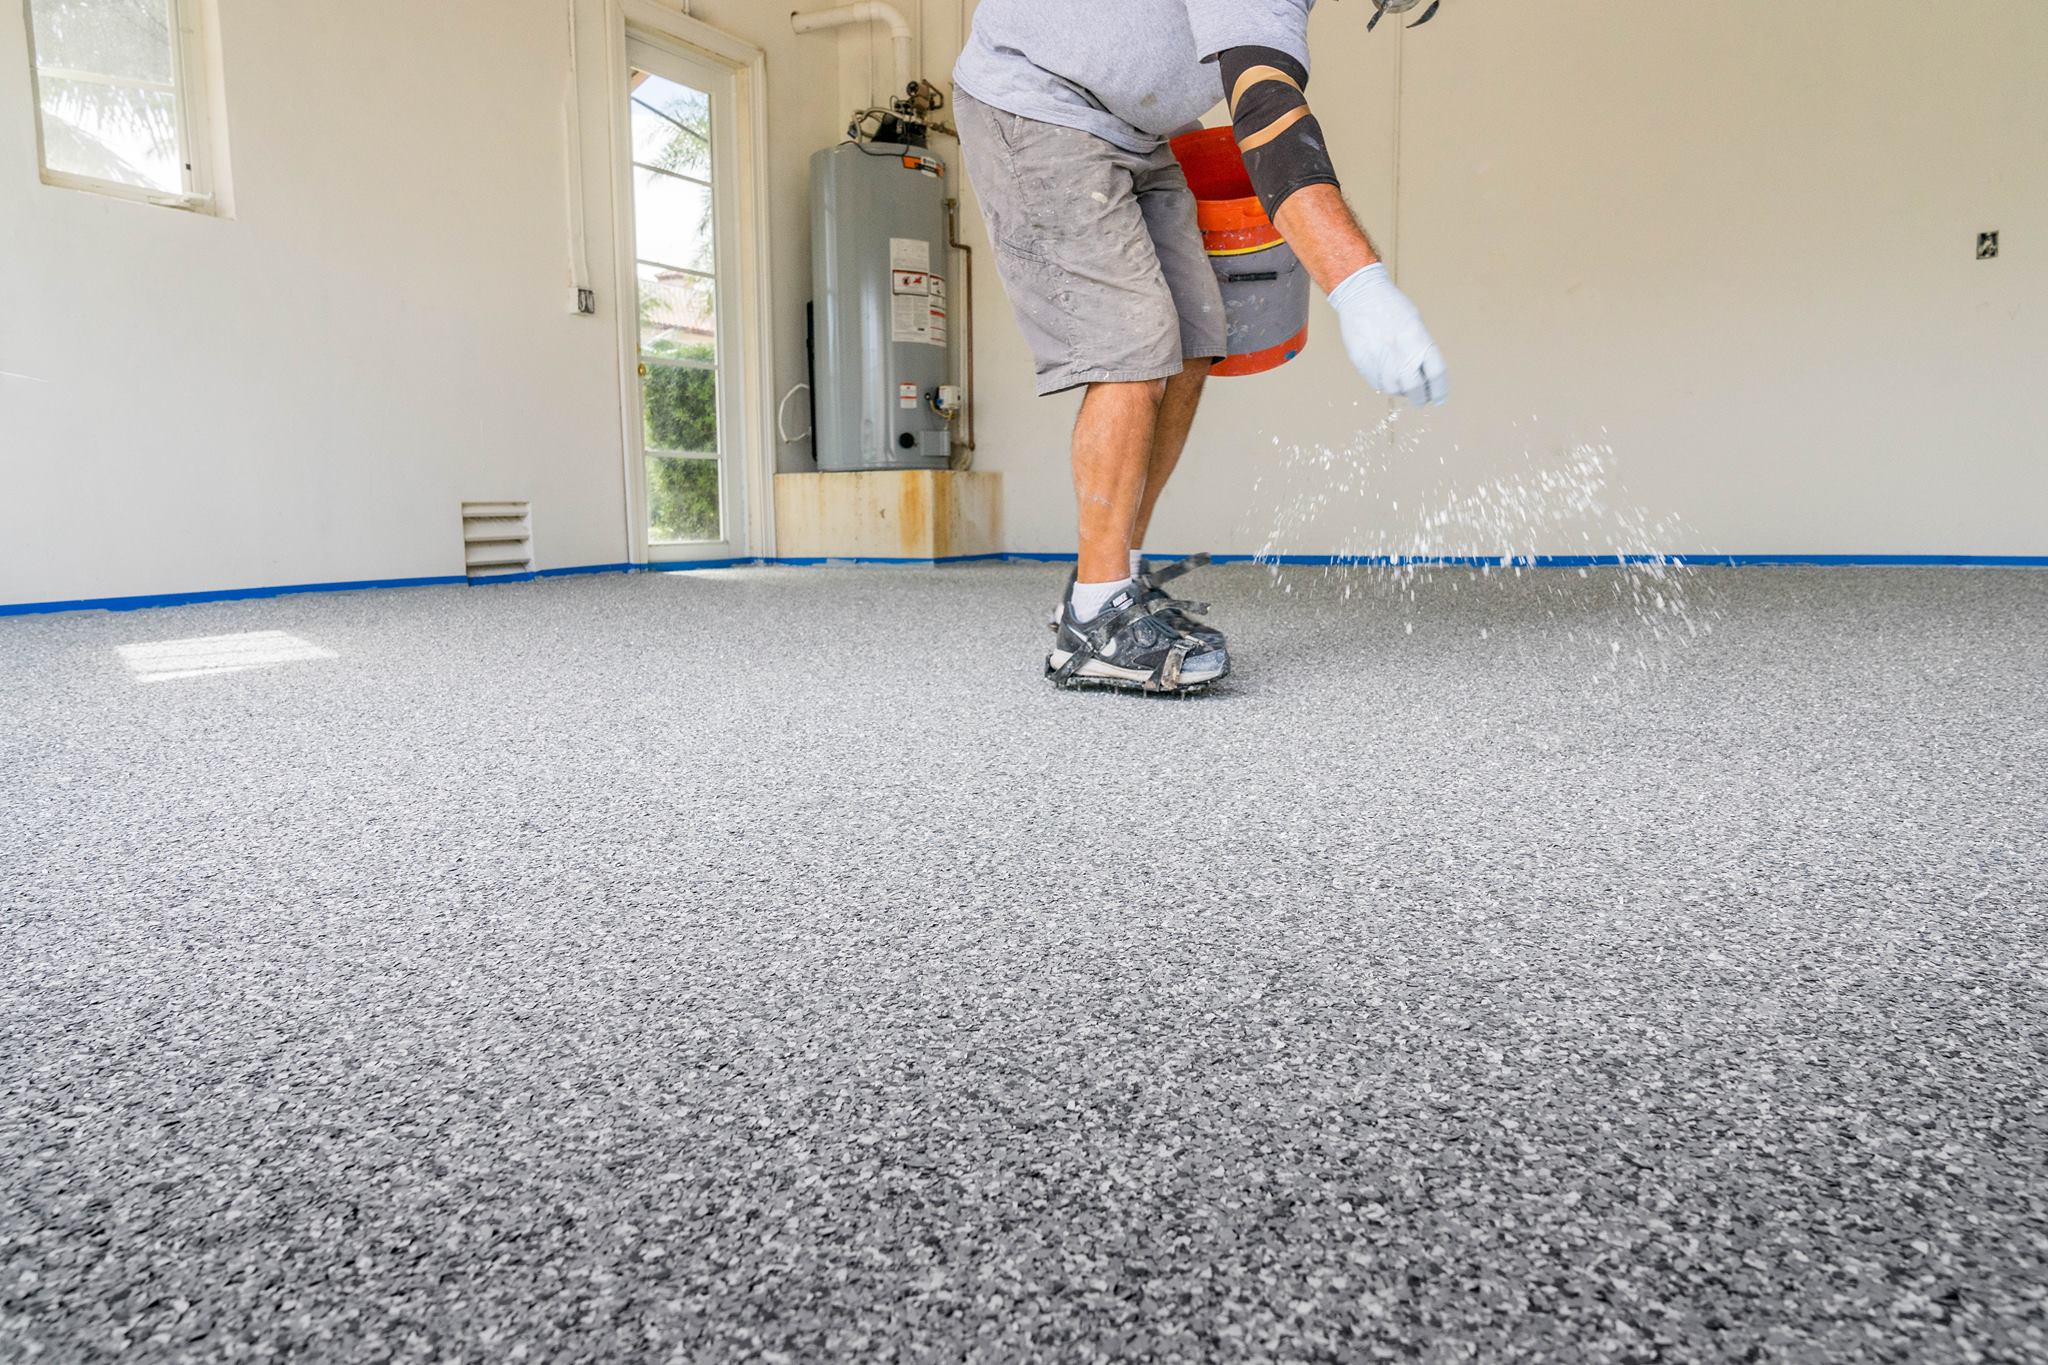 Garage Floor Remodeling: 4 Ways to Transform Your Garage Floor Surfaces | Xtreme Polishing Systems